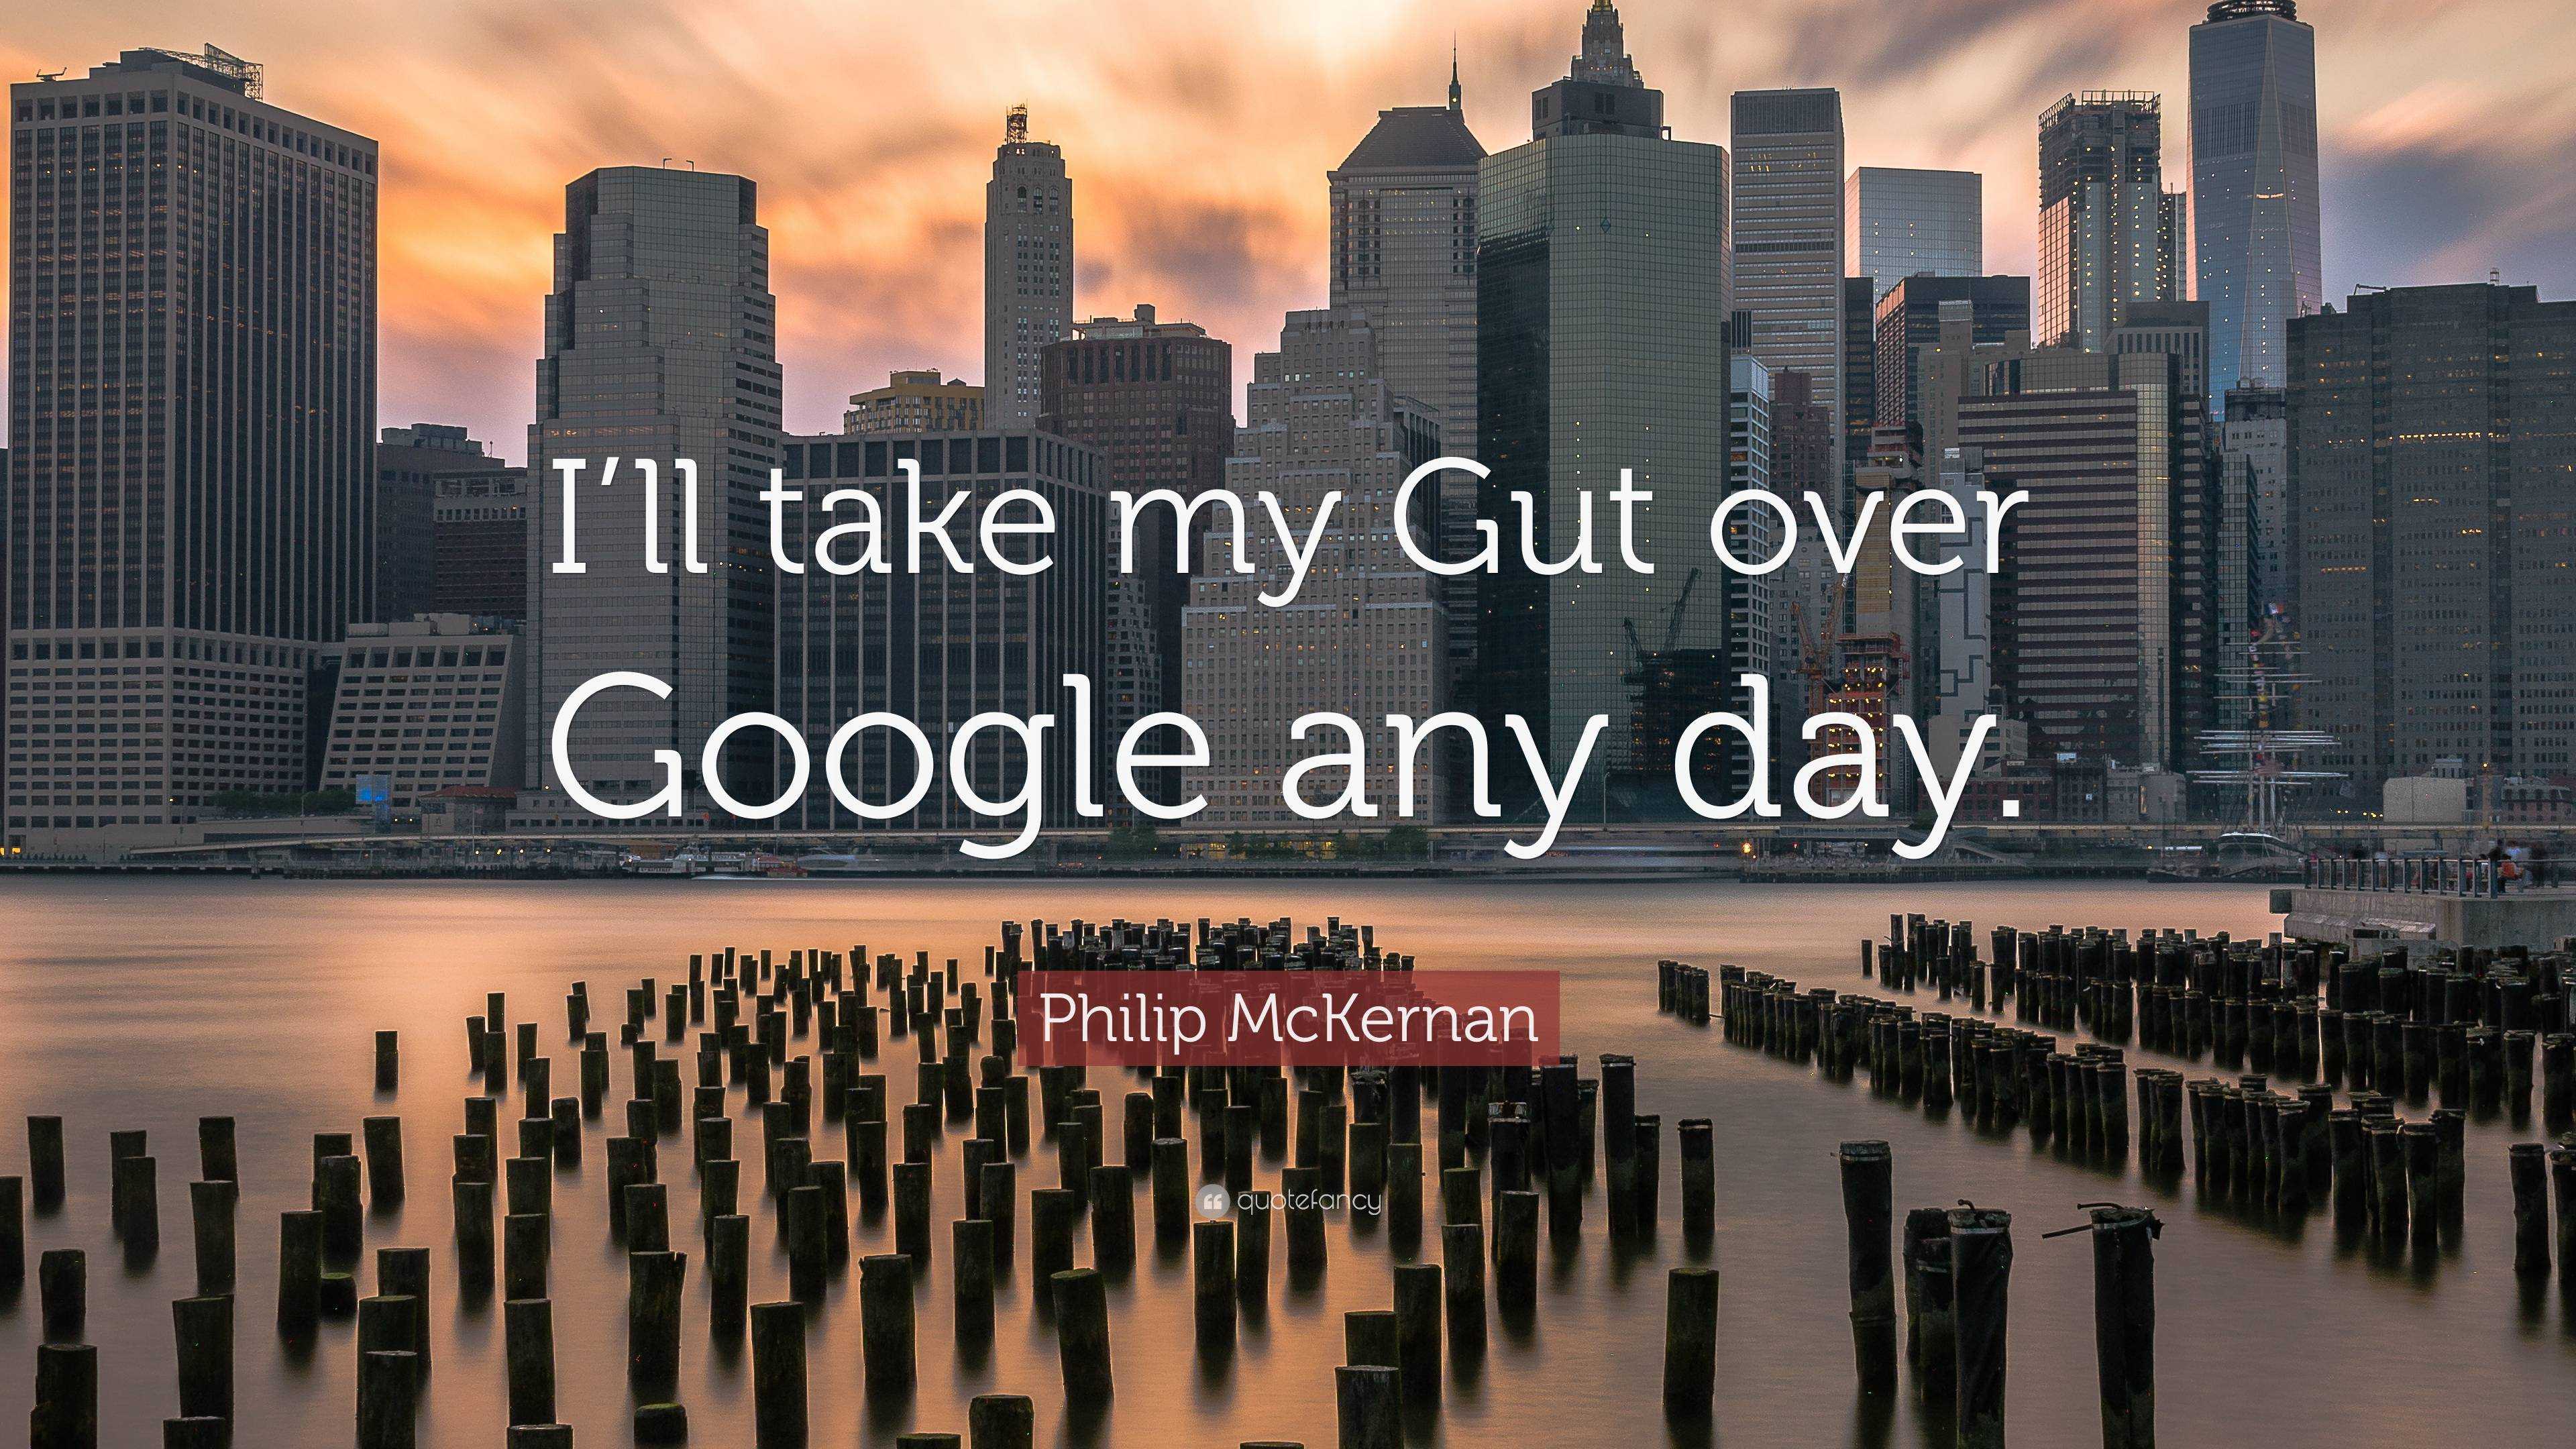 Philip McKernan Quote: “I'll take my Gut over Google any day.”